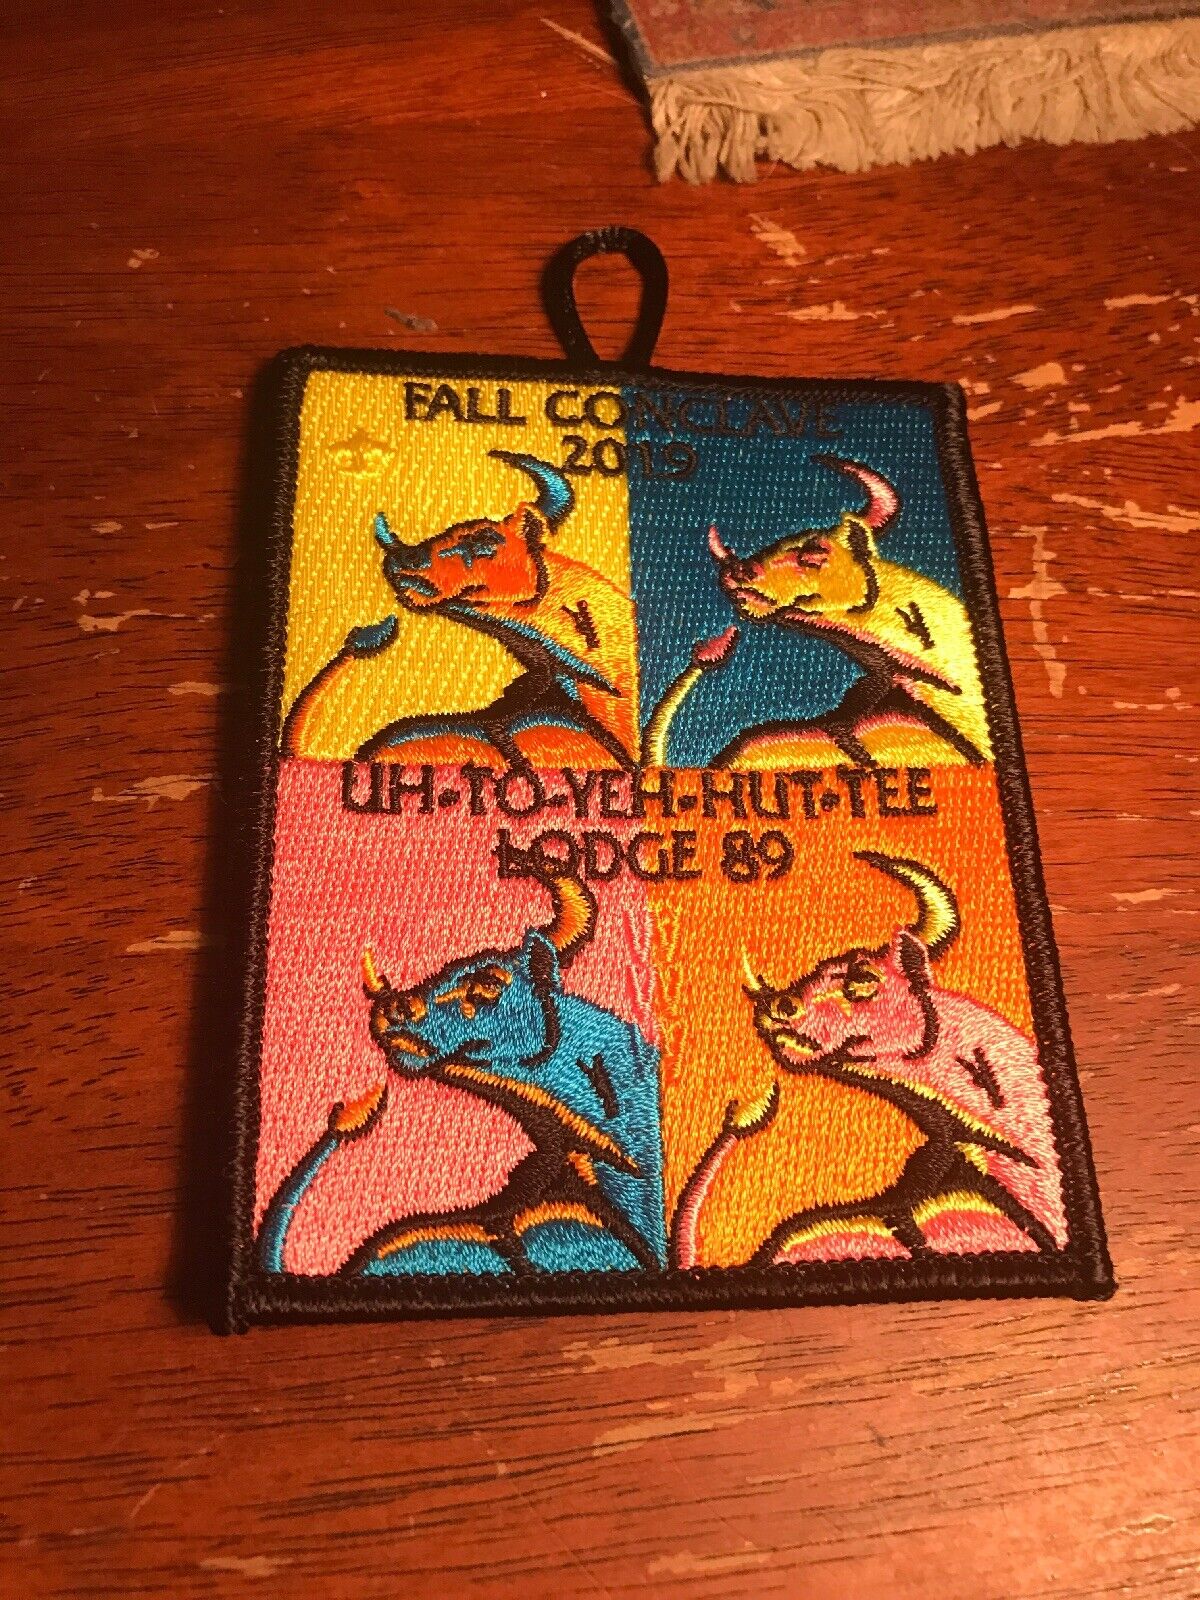 Uh-To-Yeh-Hut-Tee Lodge 2019 Fall Conclave OA Order of the Arrow Warhol 24-113B